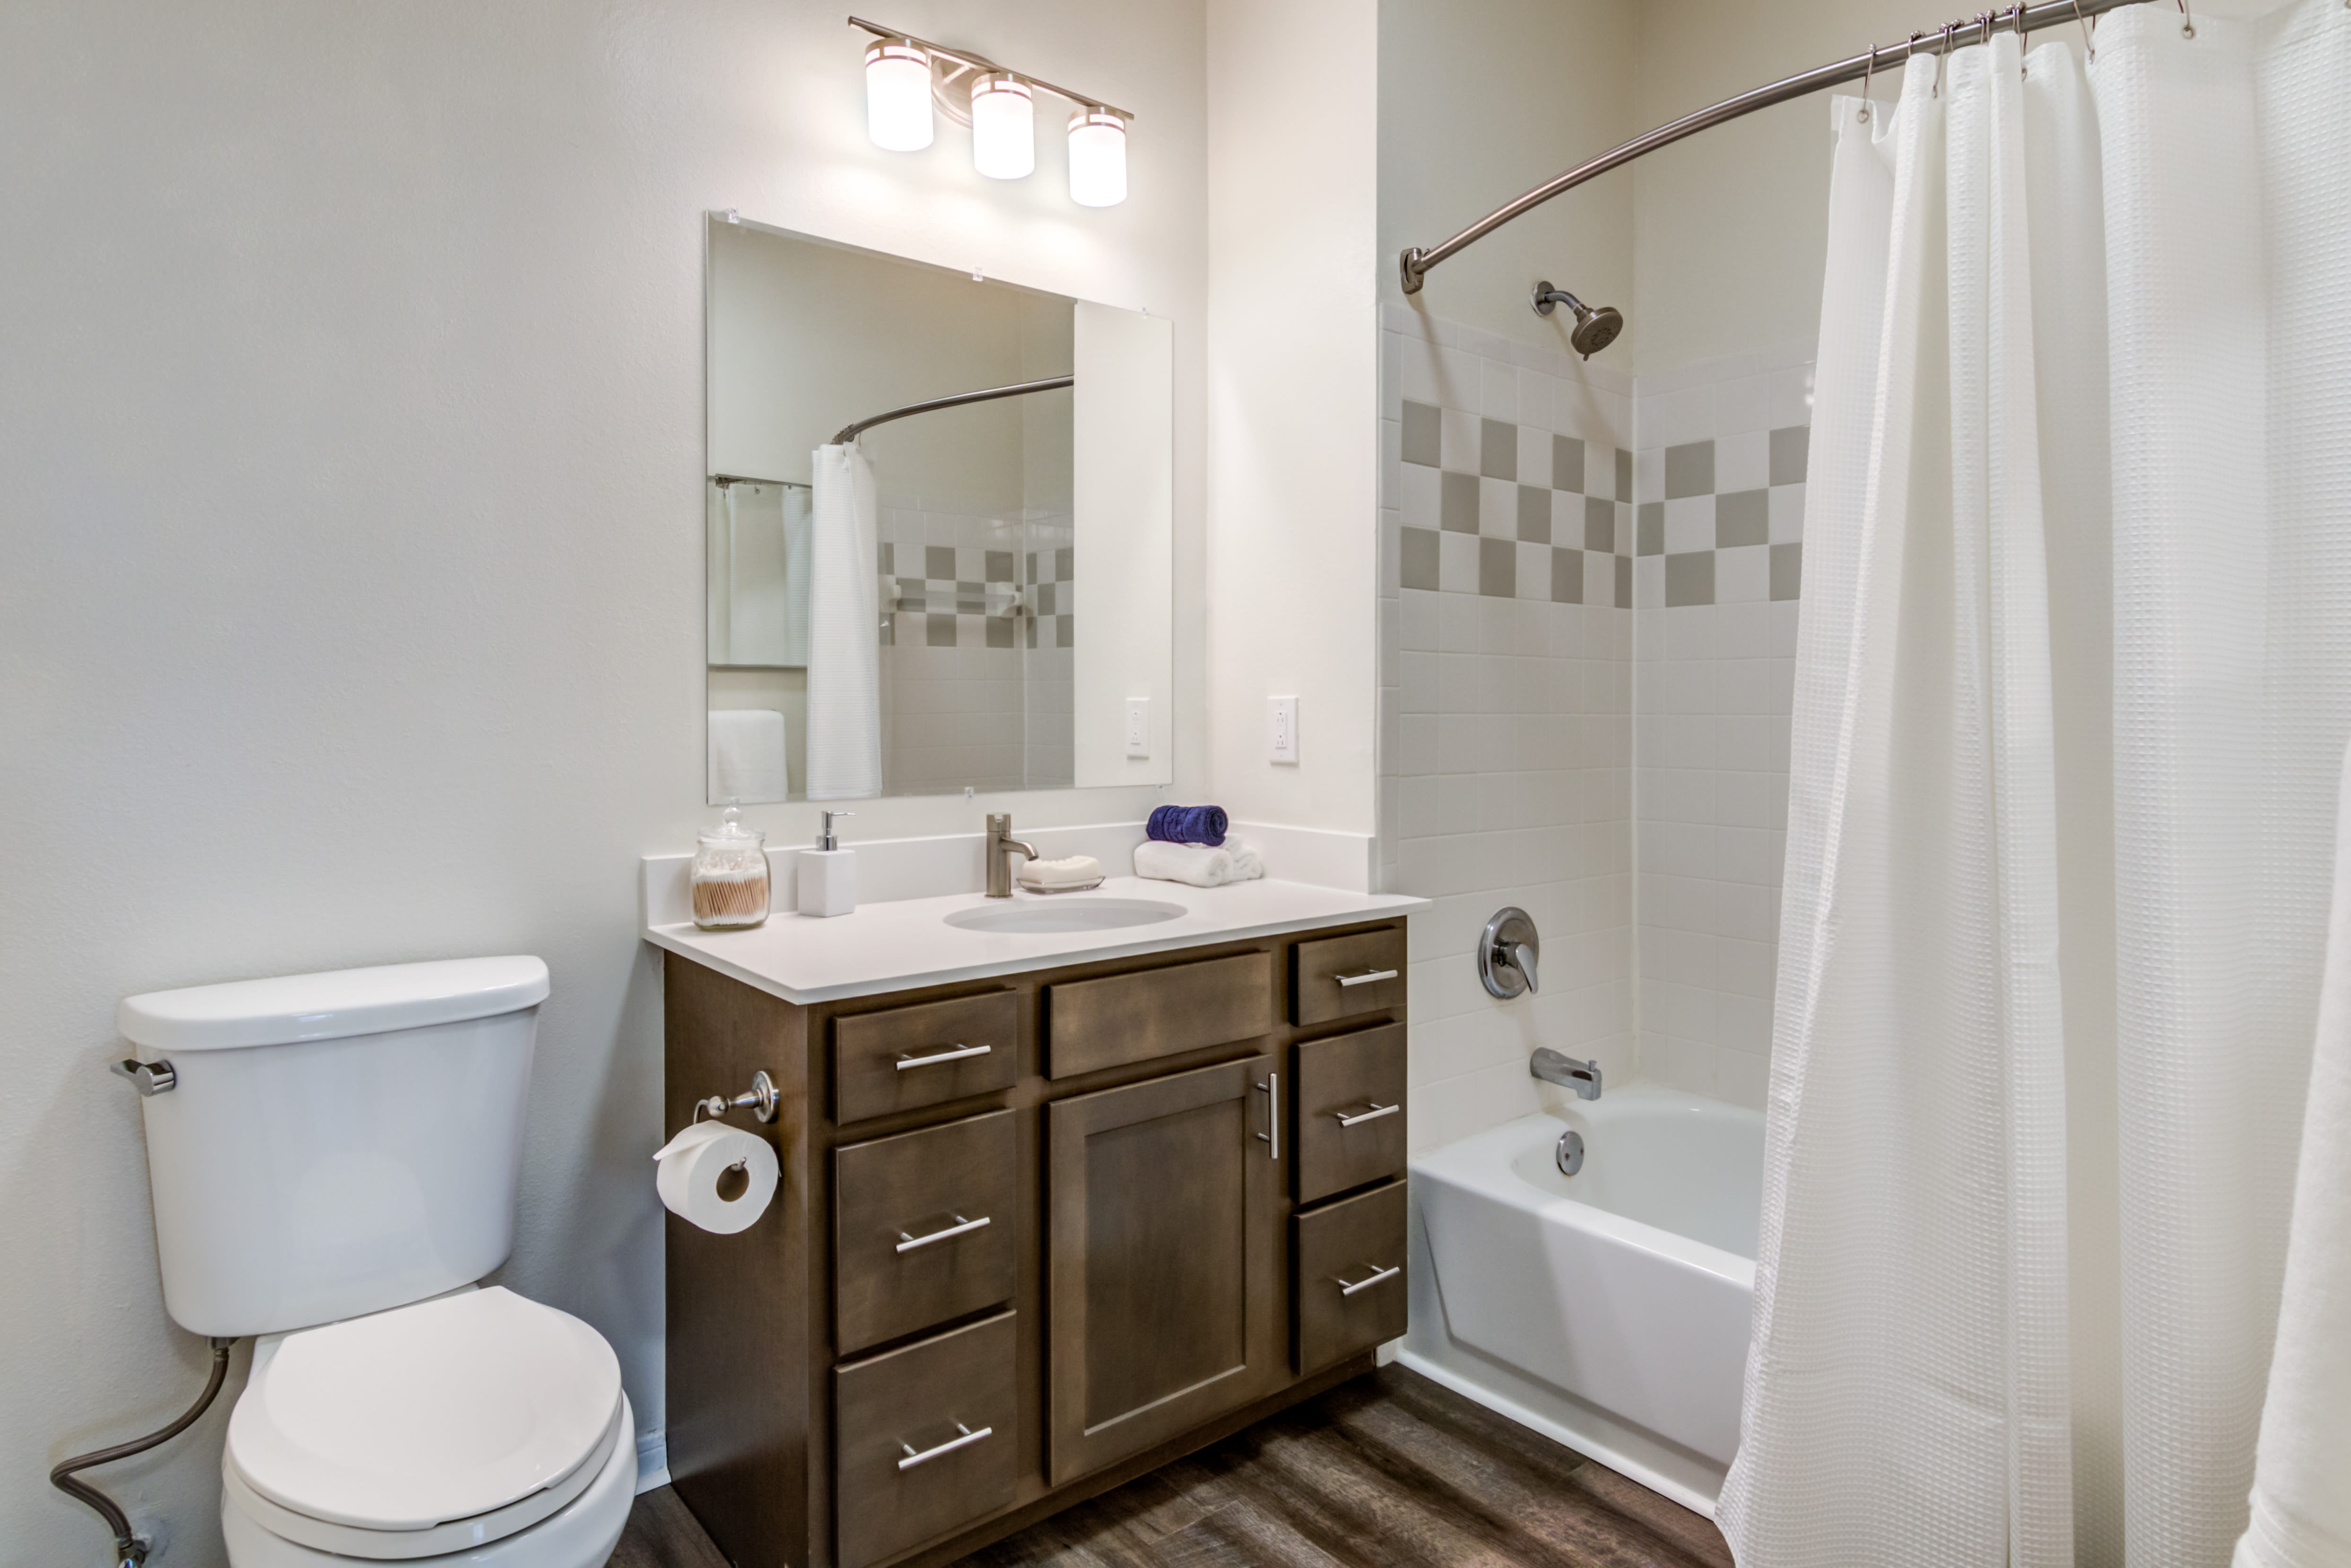 Clean bathroom with a shower tub at Sofi Parc Grove in Stamford, Connecticut